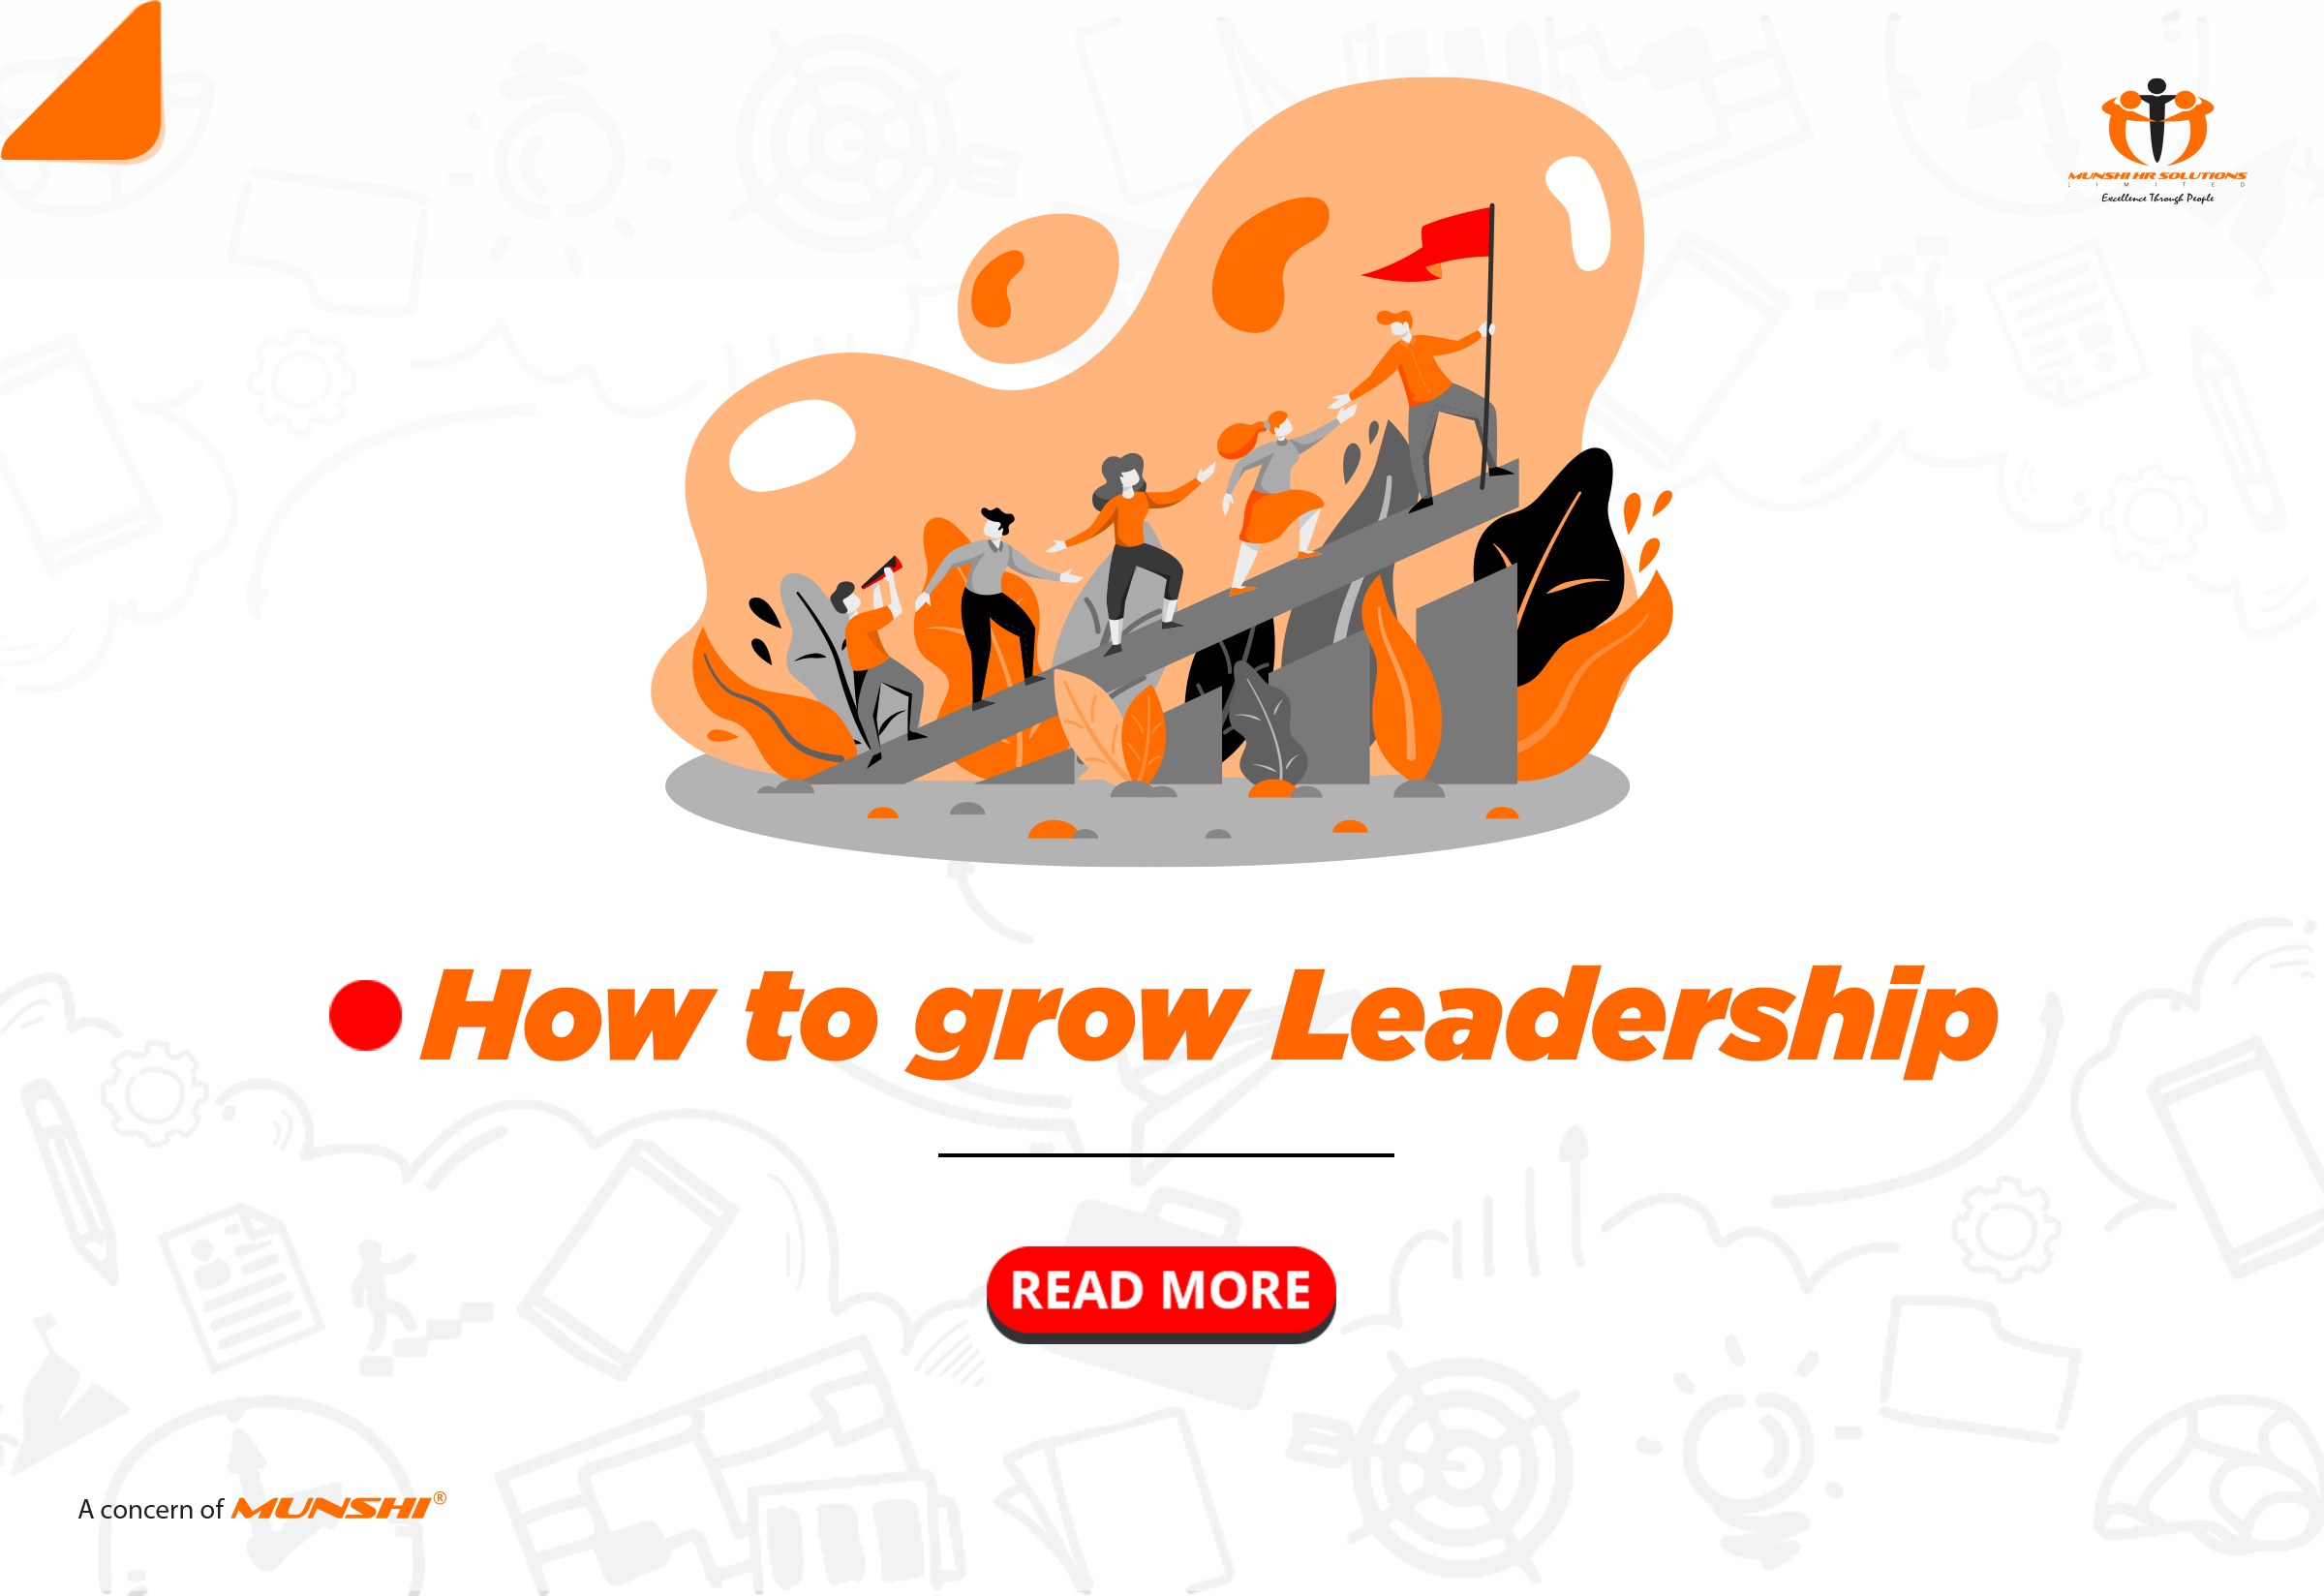 Your Leadership Potential: Learn How to Grow as a Leader